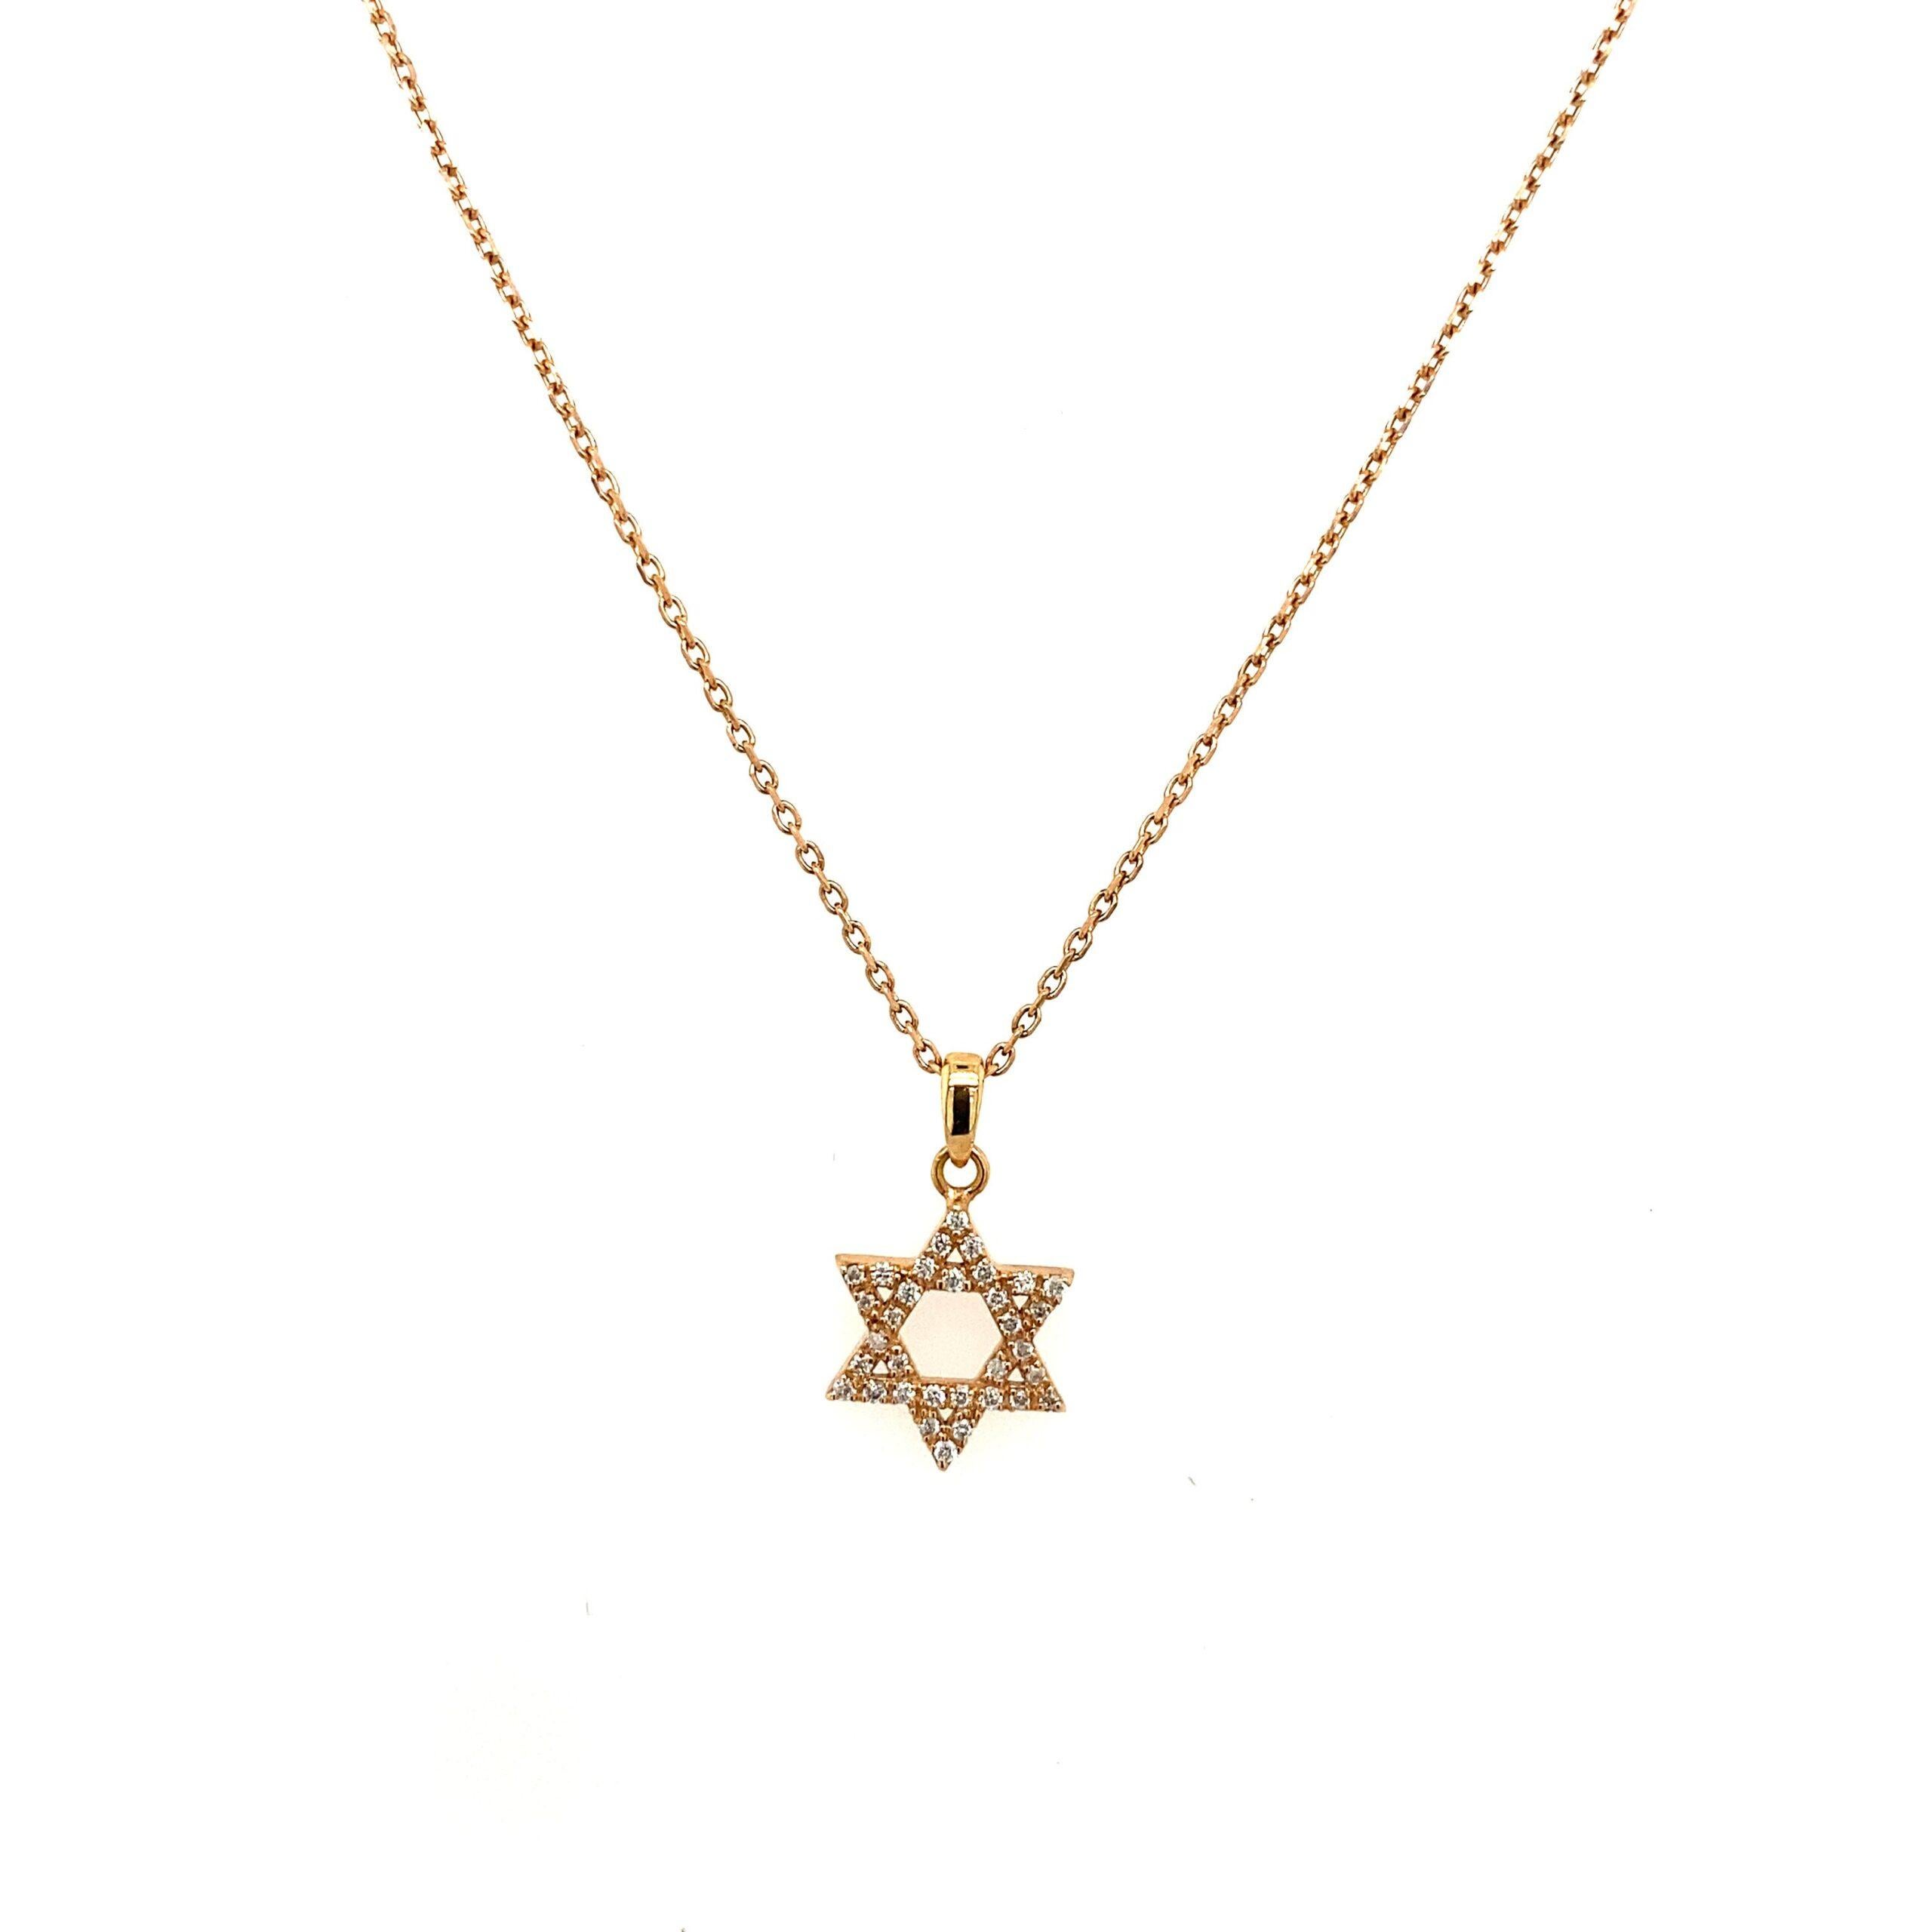 New Rose Gold Diamond Necklace Star of David, Set With 0.12ct, In 14ct Gold

Additional Information:
Total Diamond Weight: 0.12ct
Diamond Colour: G
Diamond Clarity: VS
Total Weight Chain:2.0g
Pendant Length: 16mm
SMS4509